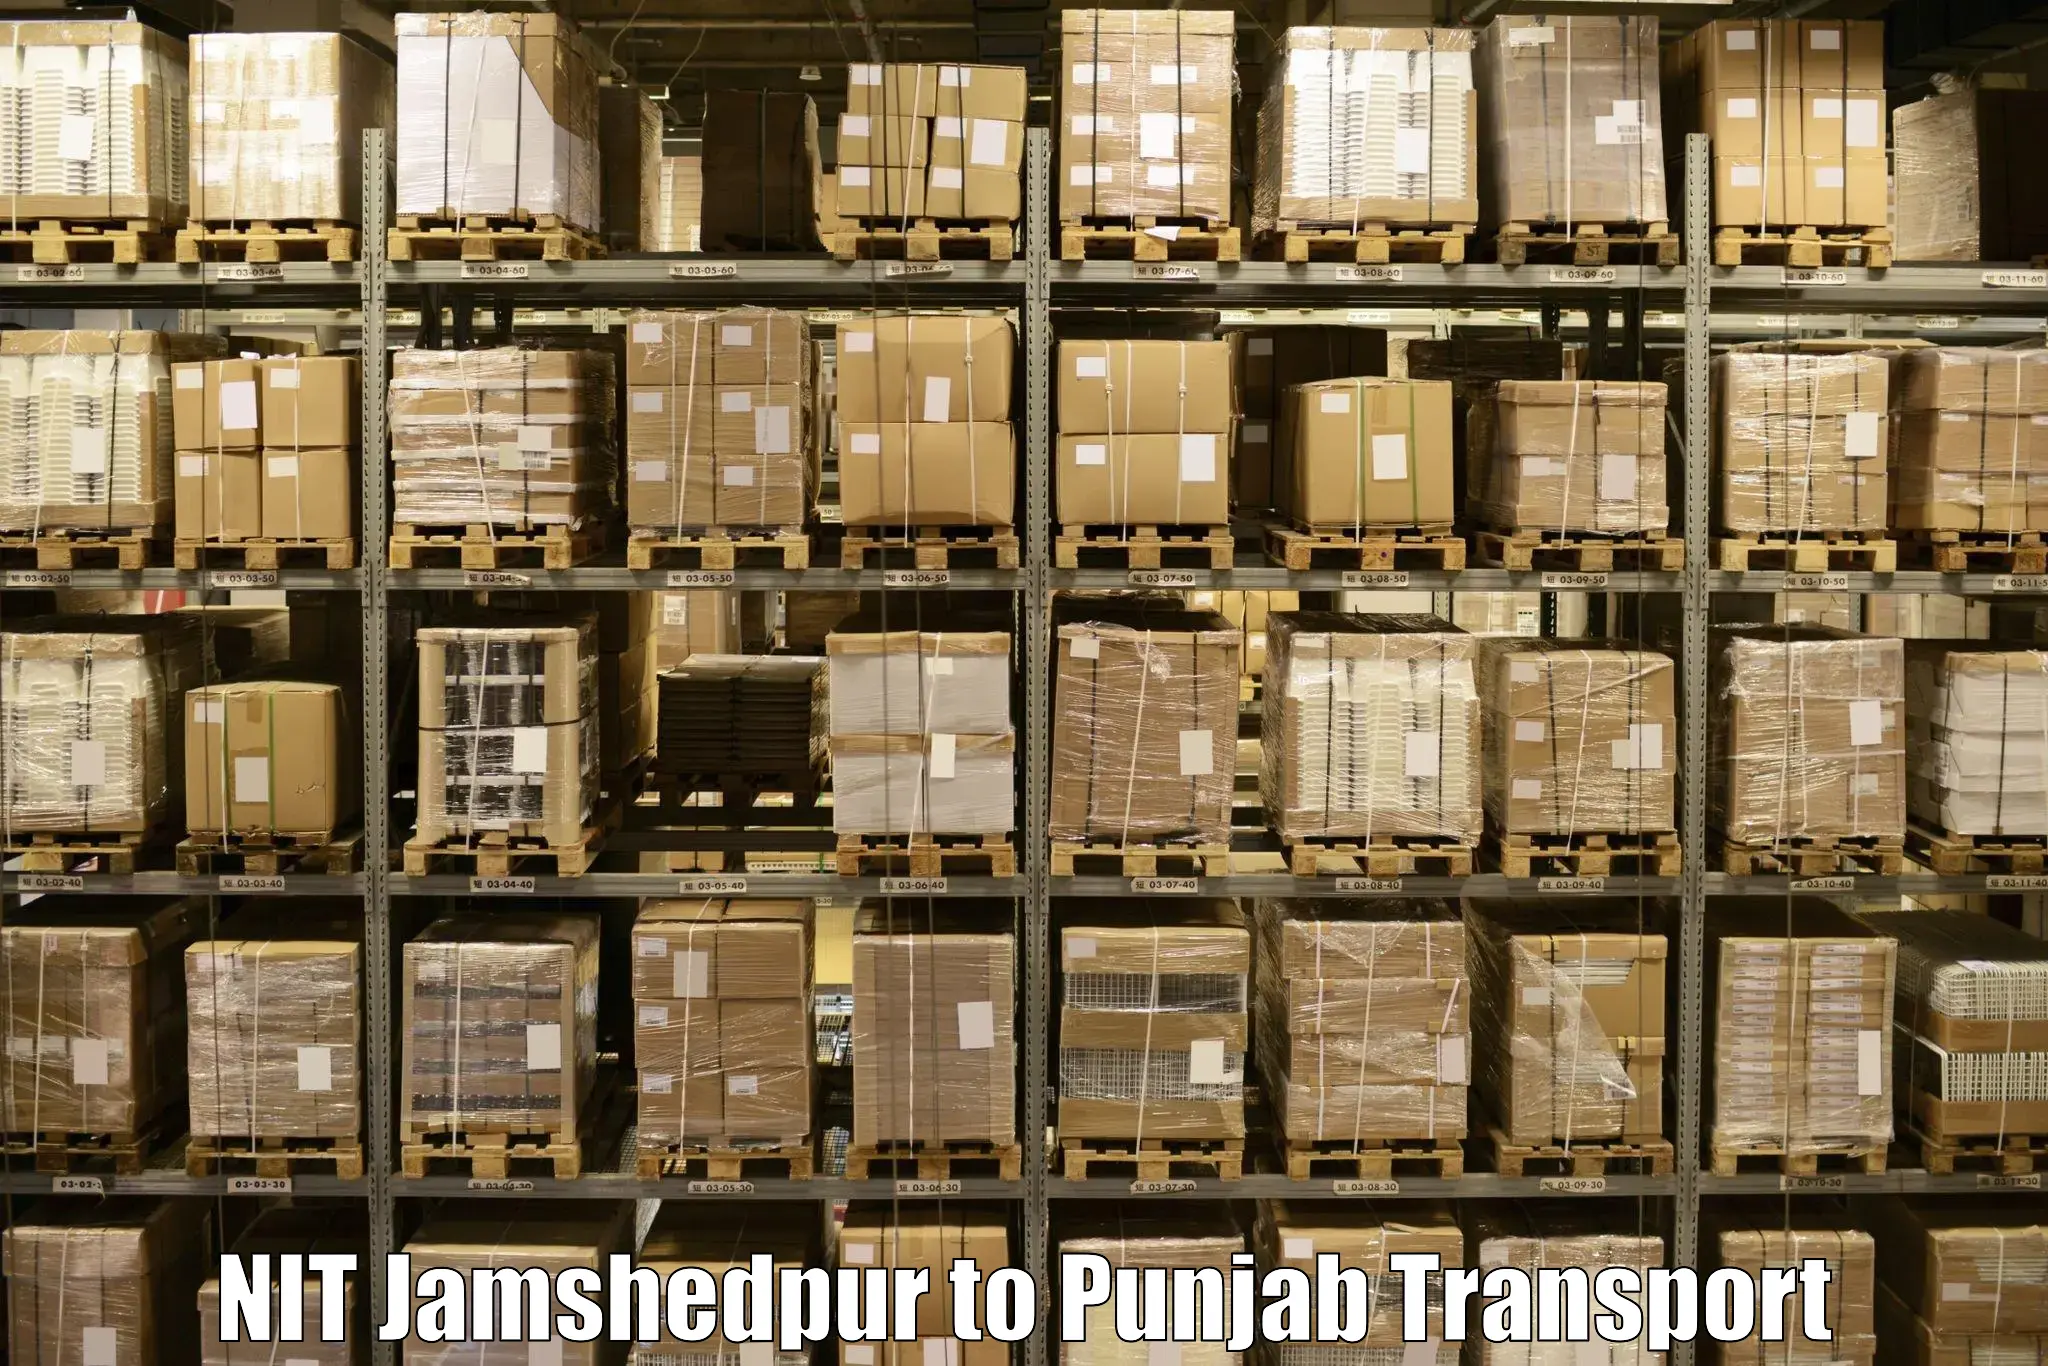 Container transport service NIT Jamshedpur to Malout